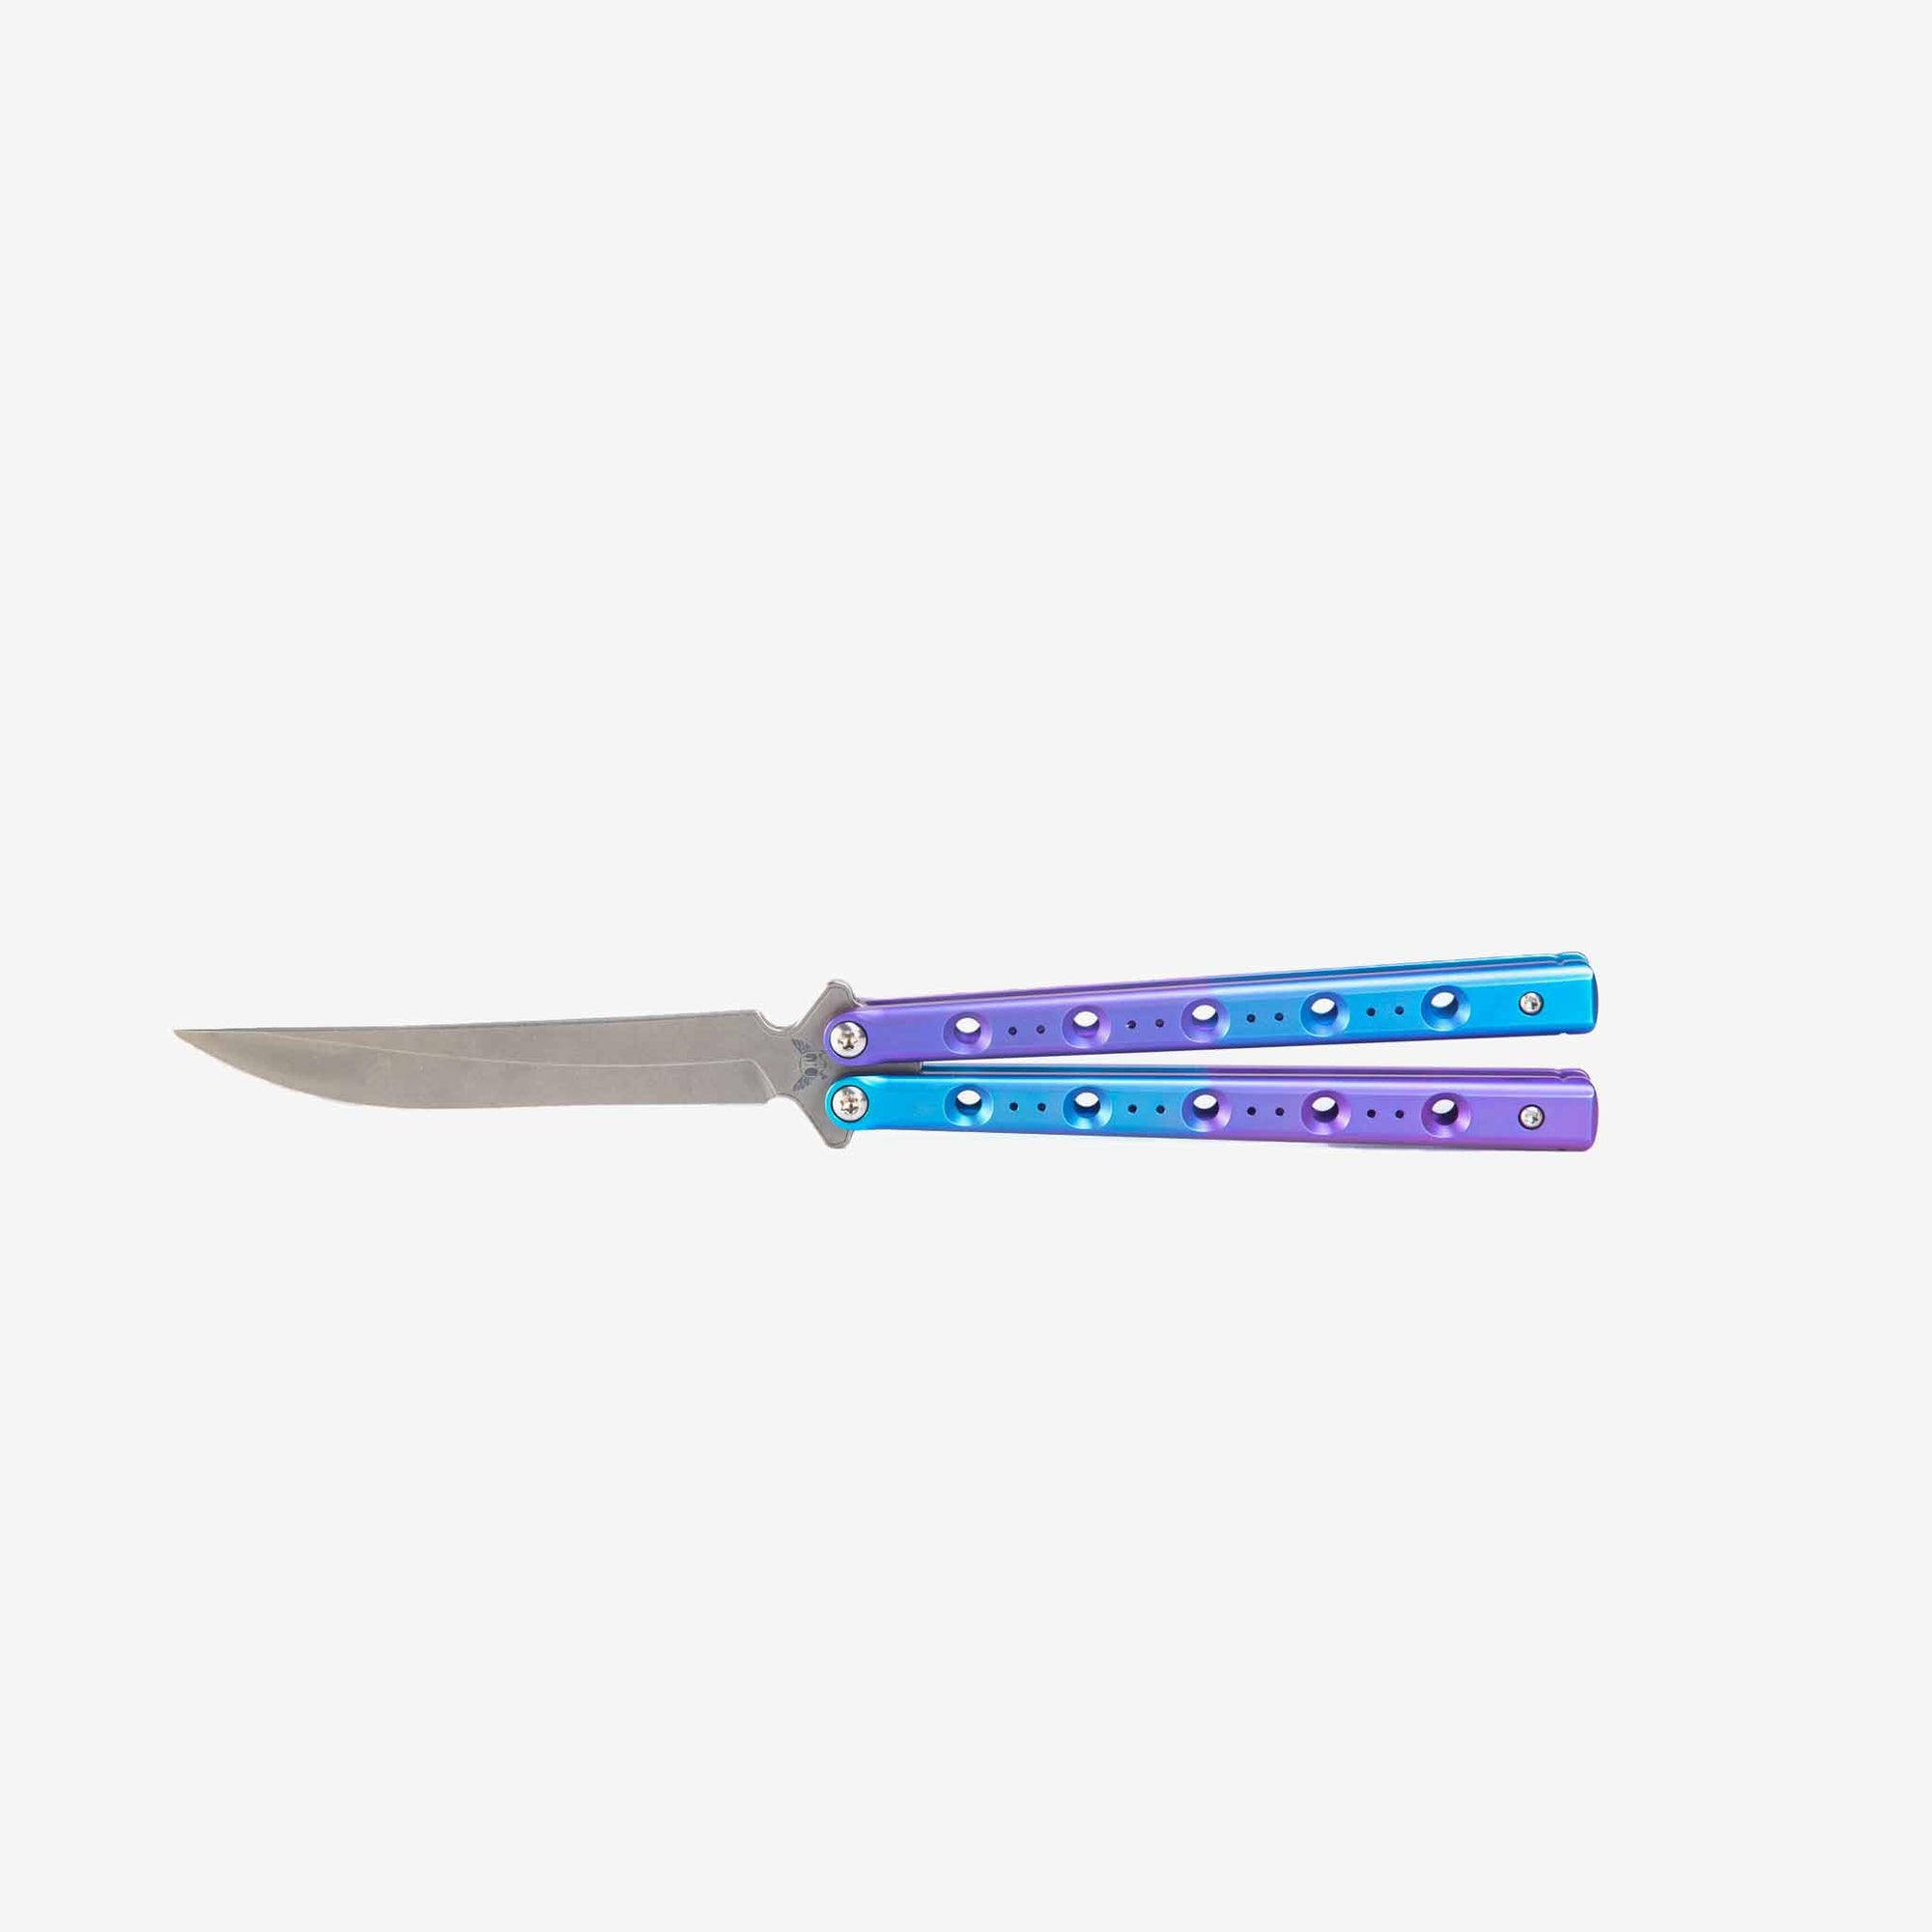 FLY One Balisong - #70 Blue Purple Reverse